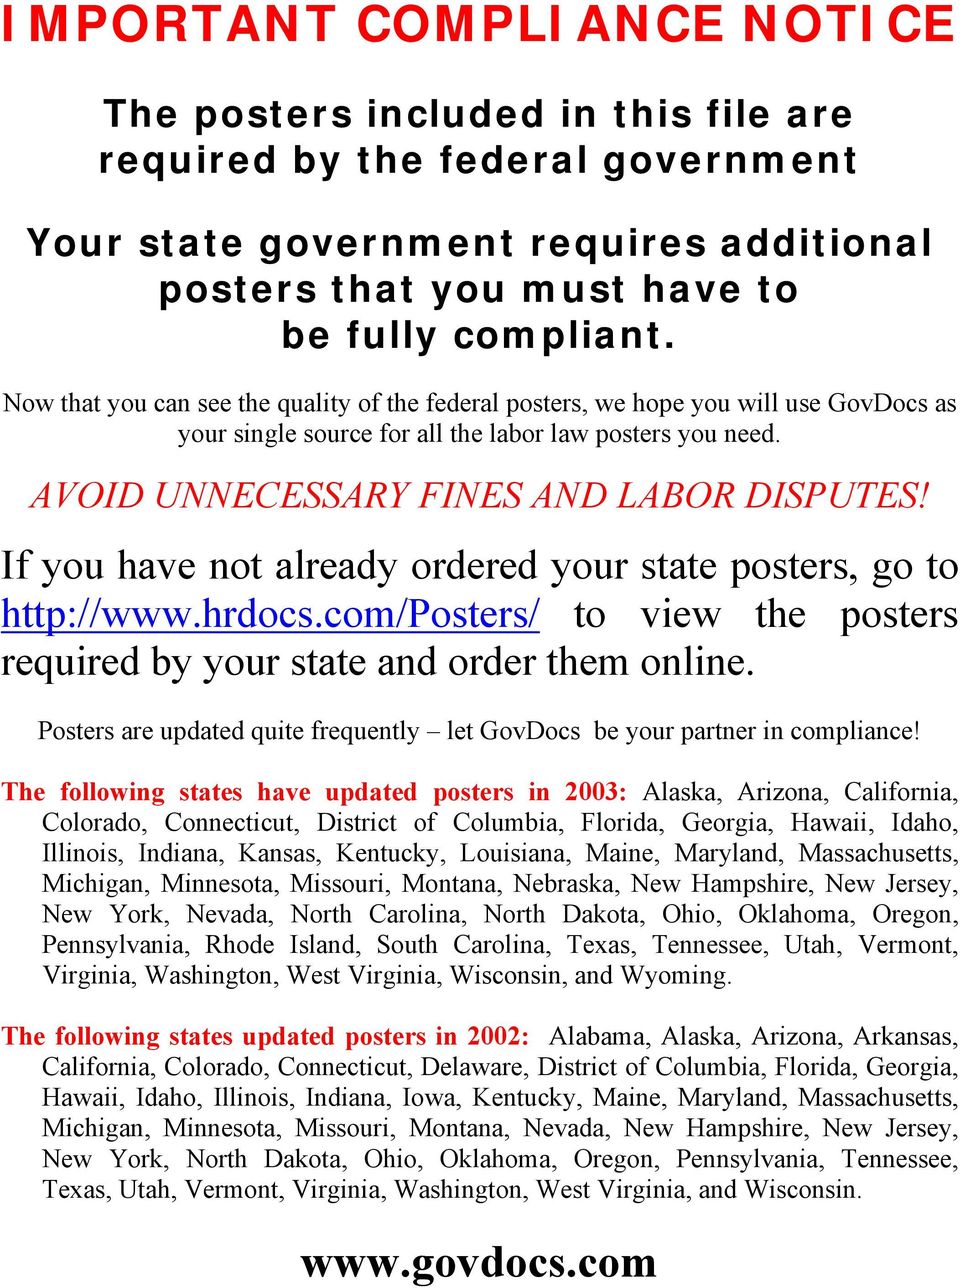 If you have not already ordered your state posters, go to http://www.hrdocs.com/posters/ to view the posters required by your state and order them online.